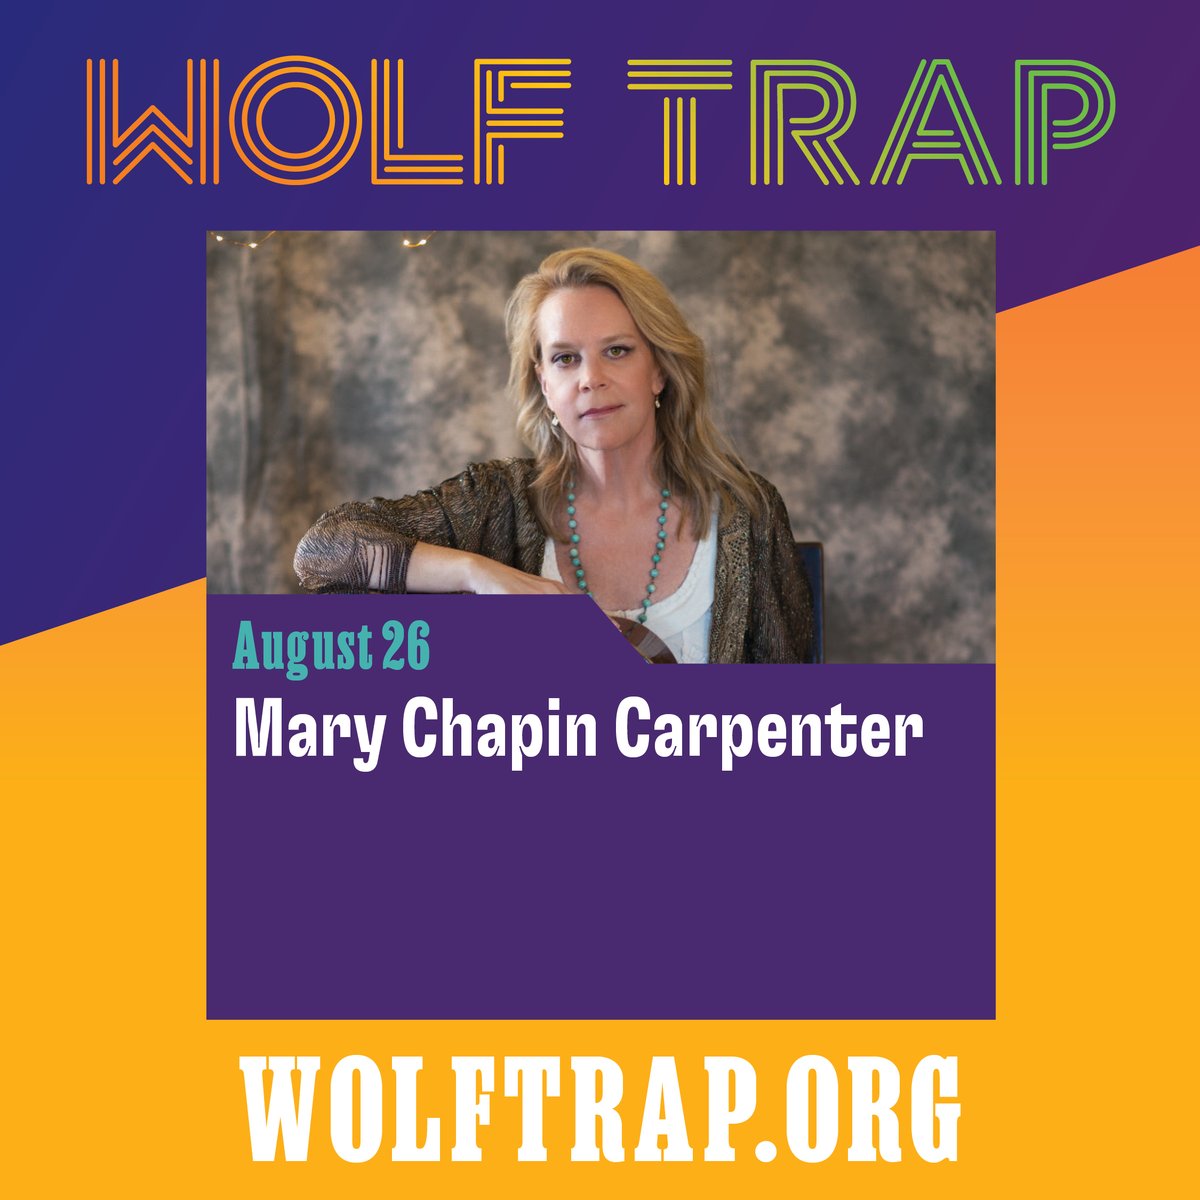 From MCC HQ: We're excited to announce Mary Chapin will return to @Wolf_Trap on August 26th! Tickets go on sale Friday, Feb 17. → wolftrap.org/summer Members buy first. Join by Feb 9 for presale access to the best shows this summer. → wolftrap.org/membership